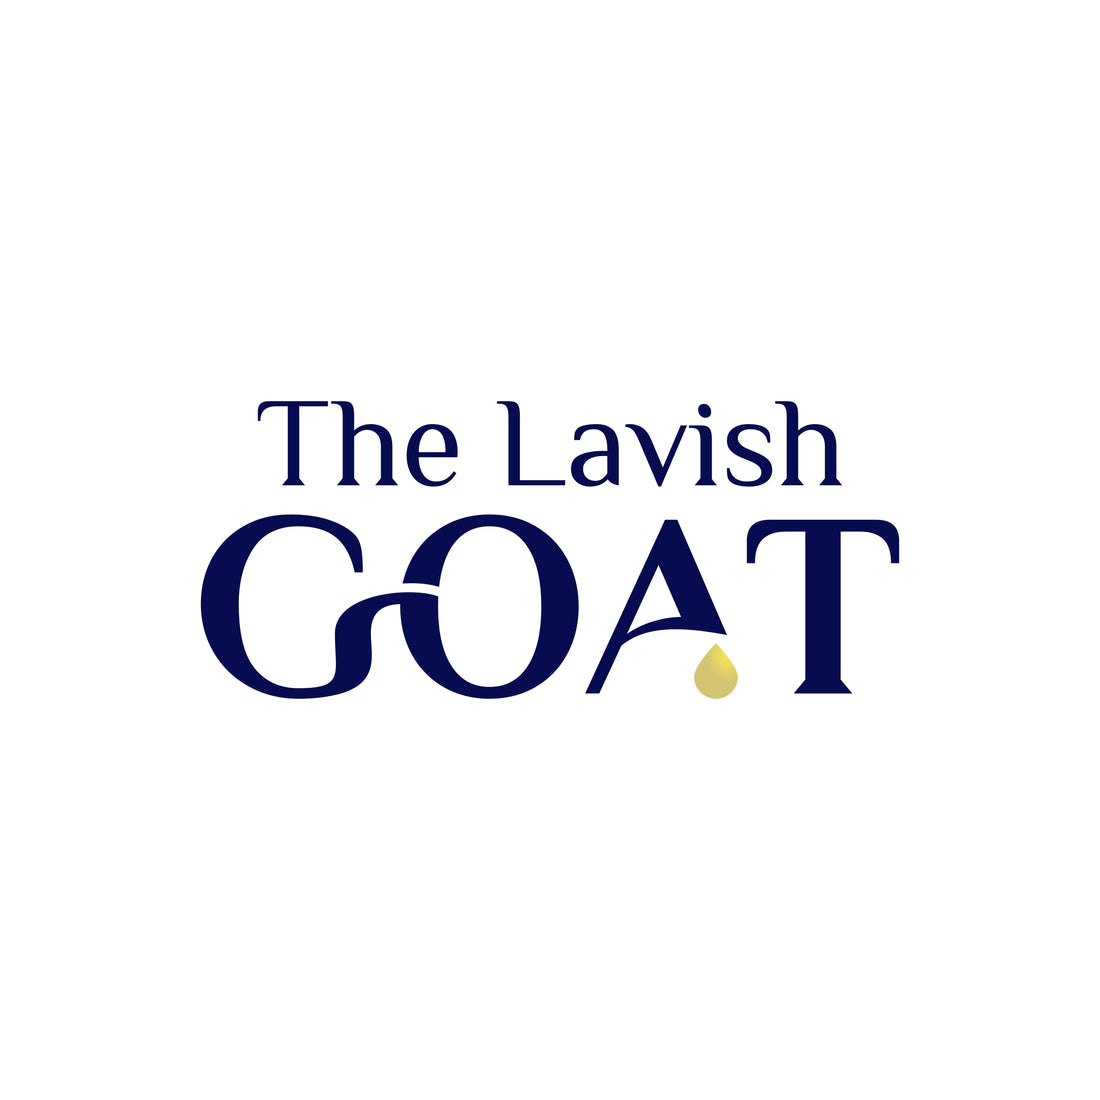 Upcoming Trends in the Beauty Industry: The Lavish Goat Leading the Charge